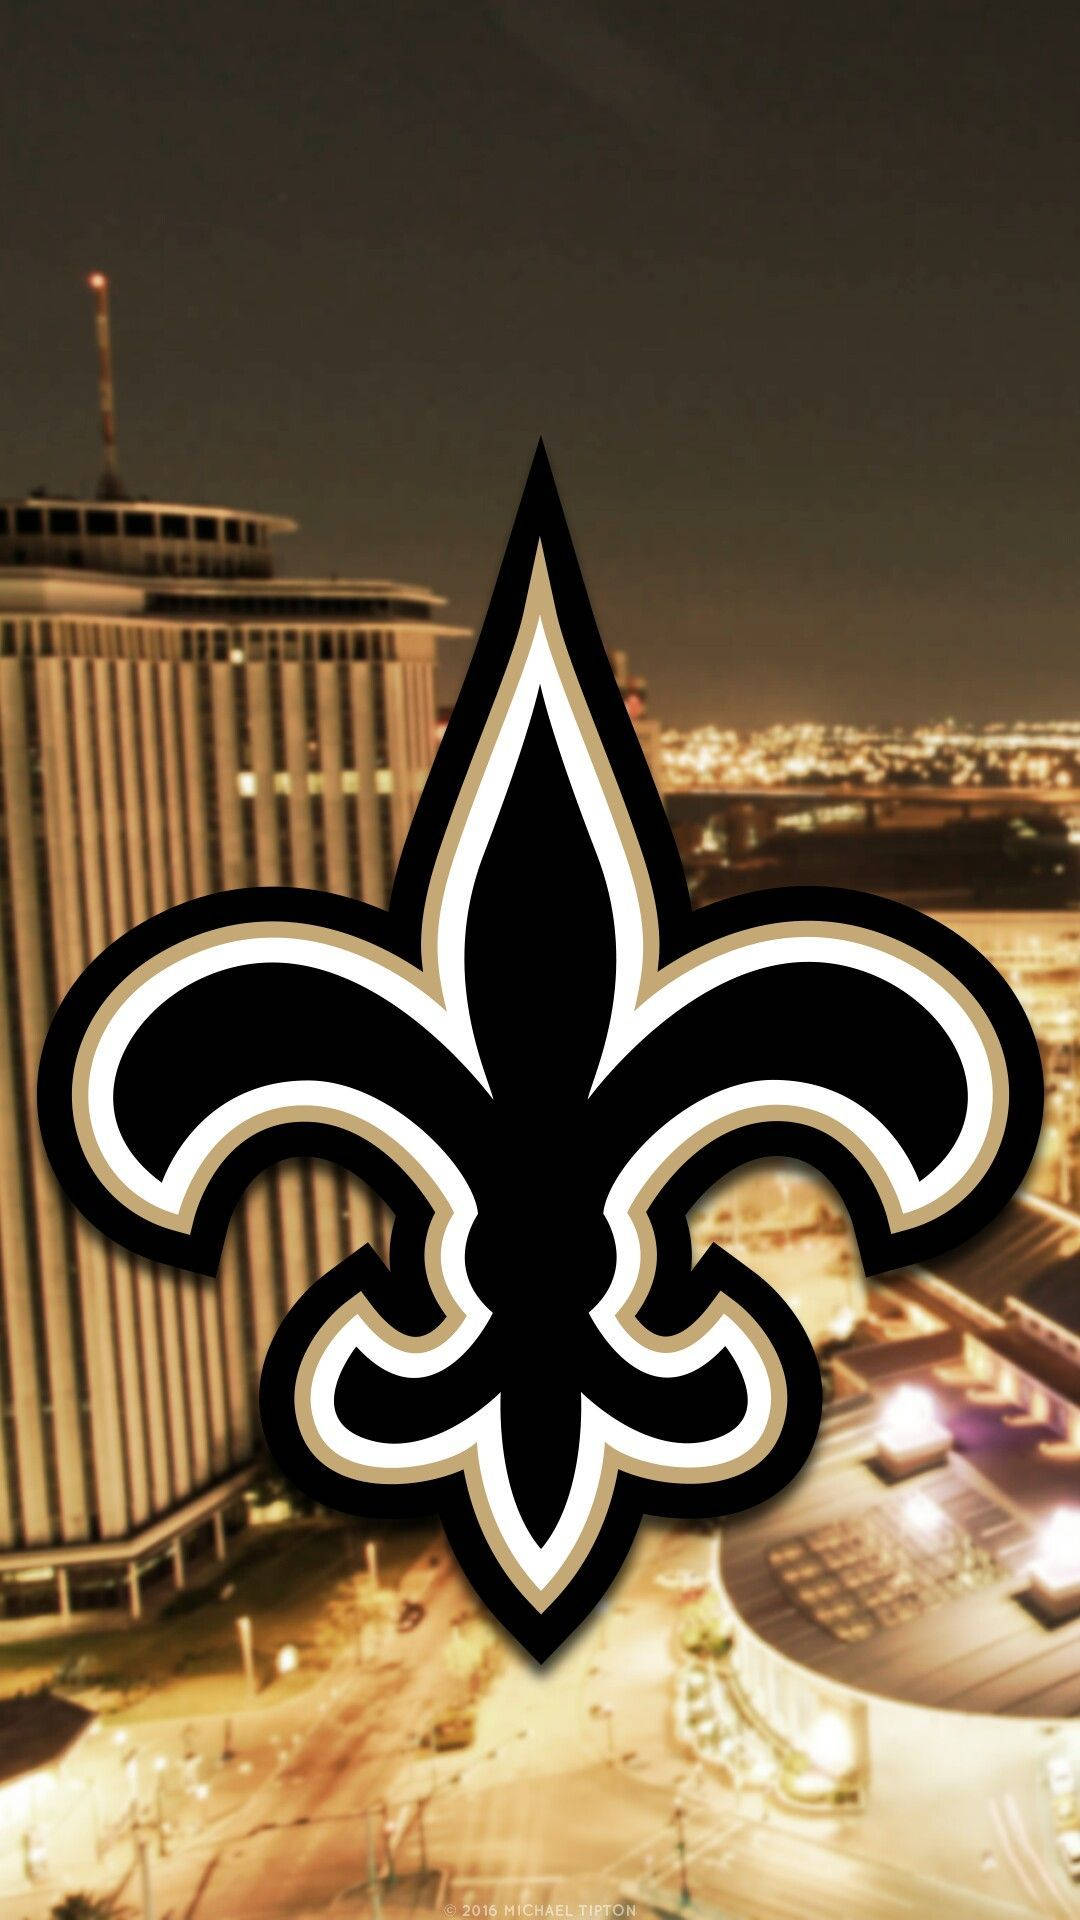 New Orleans Saints Logo With Buildings Background